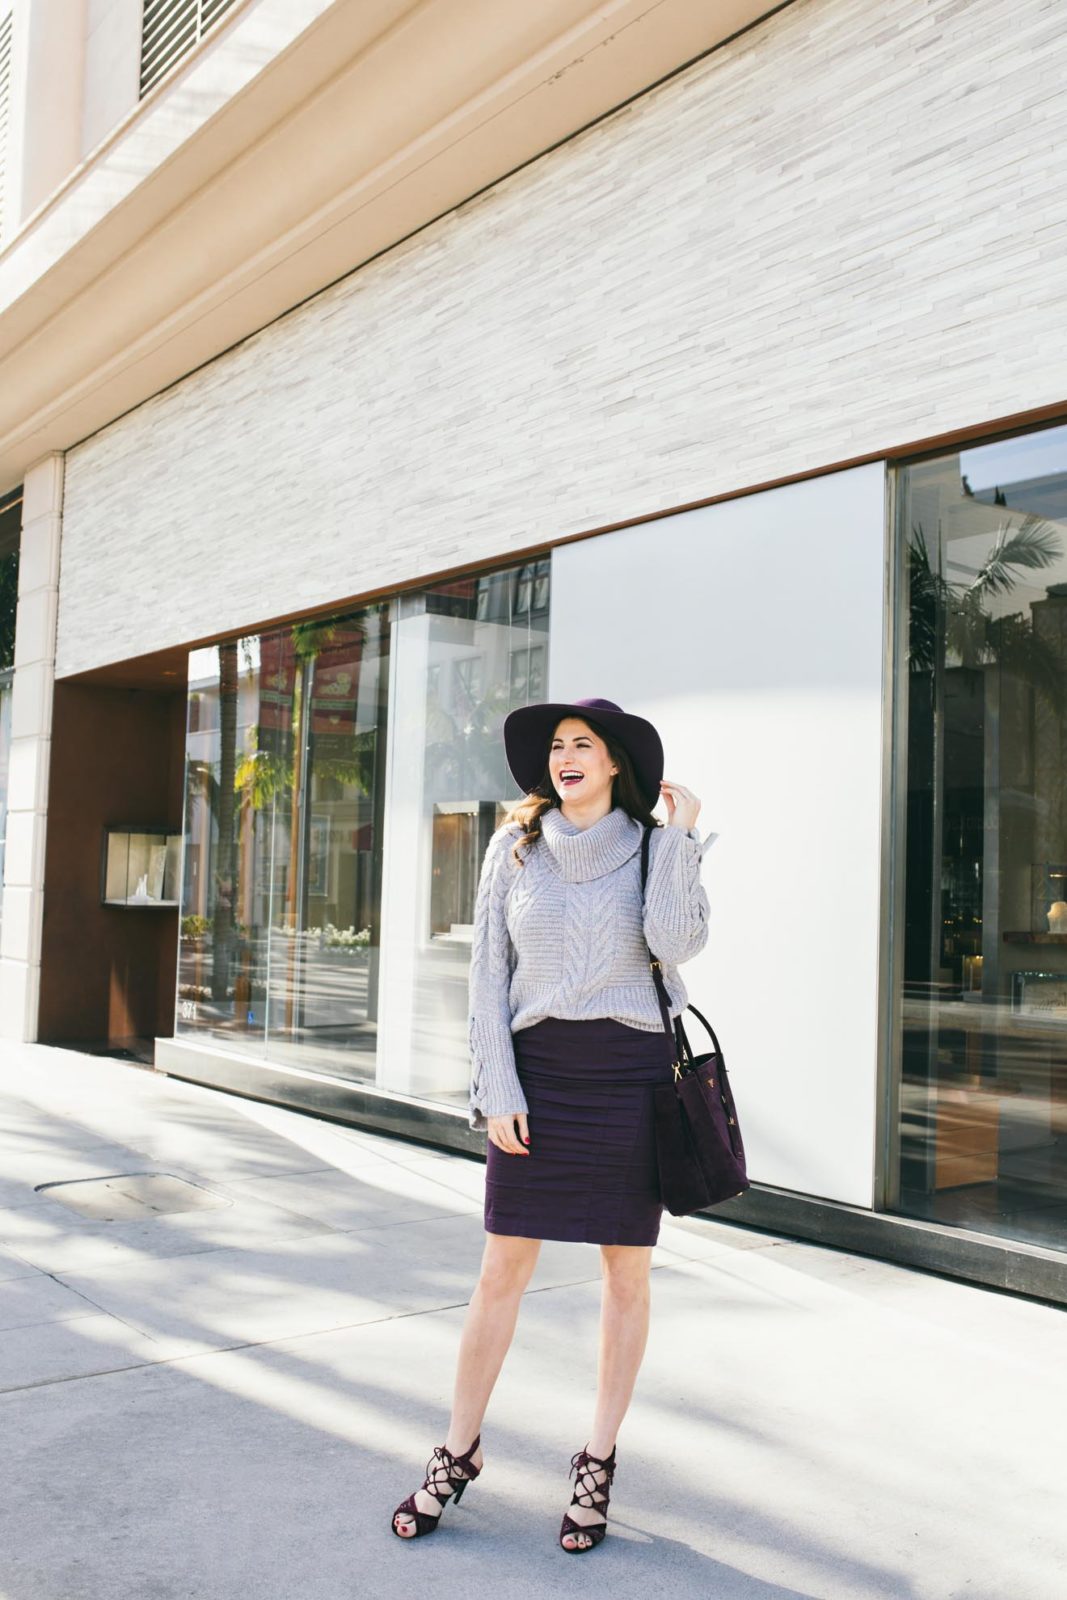 Bell Sleeve Sweaters by Los Angeles Fashion Blogger Laura Lily,